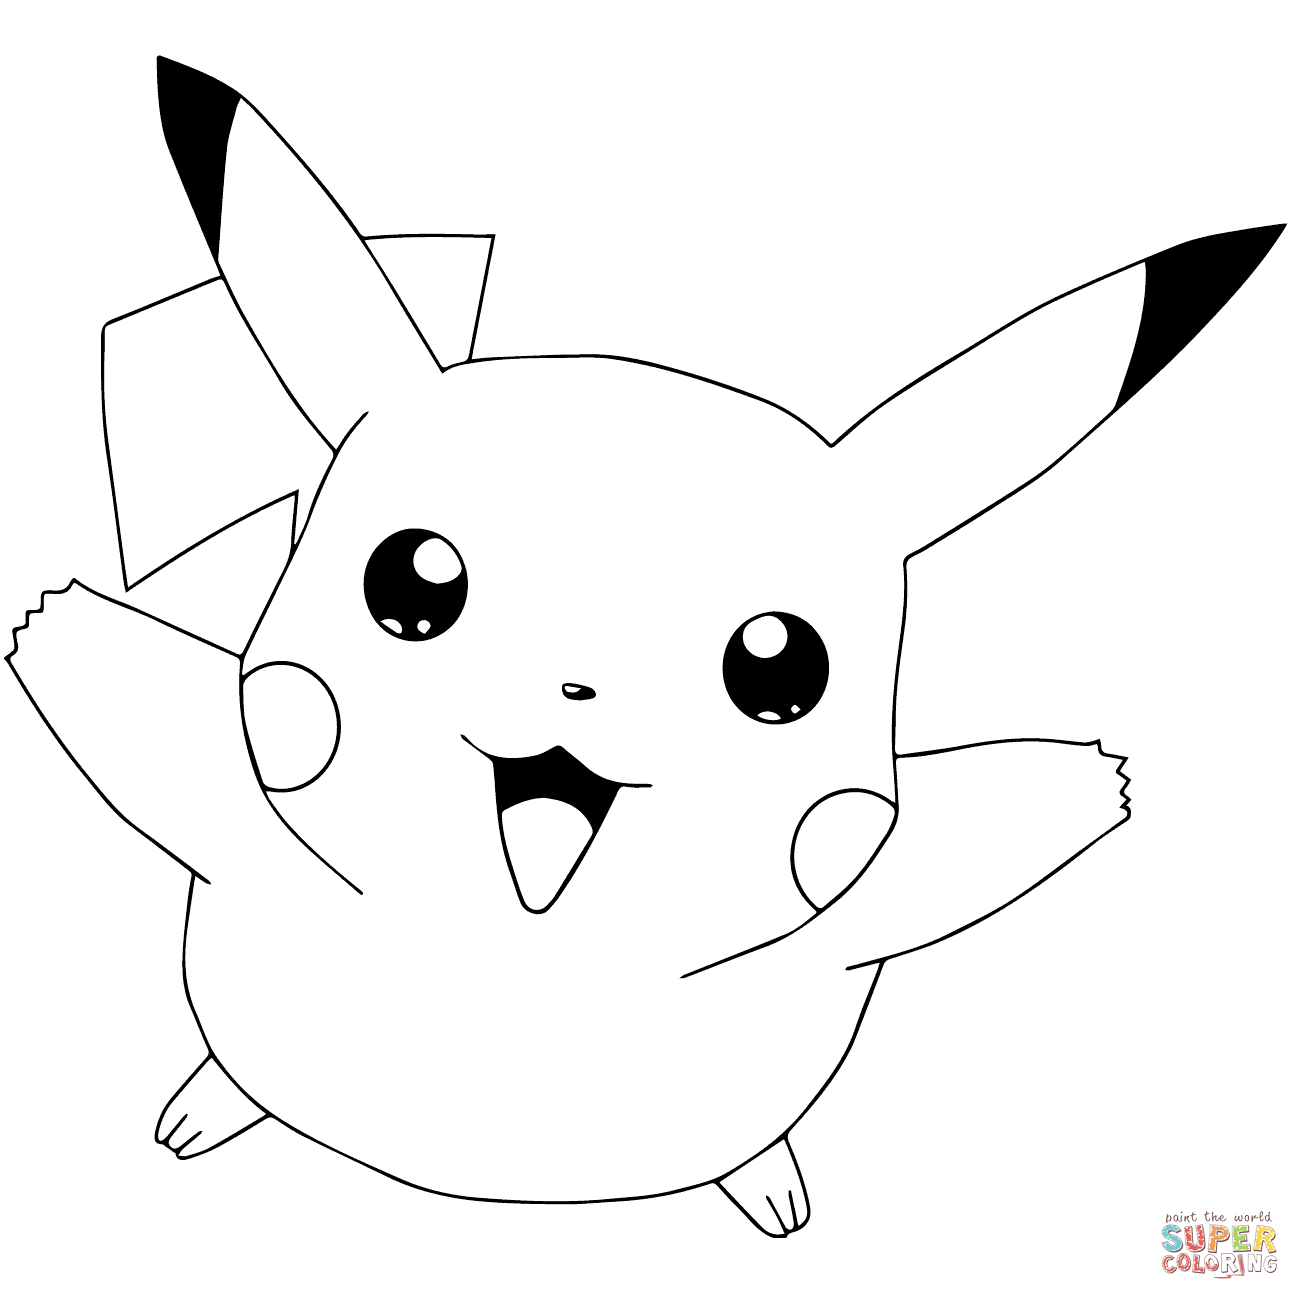 Pokãmon go pikachu flying coloring page free printable coloring pages